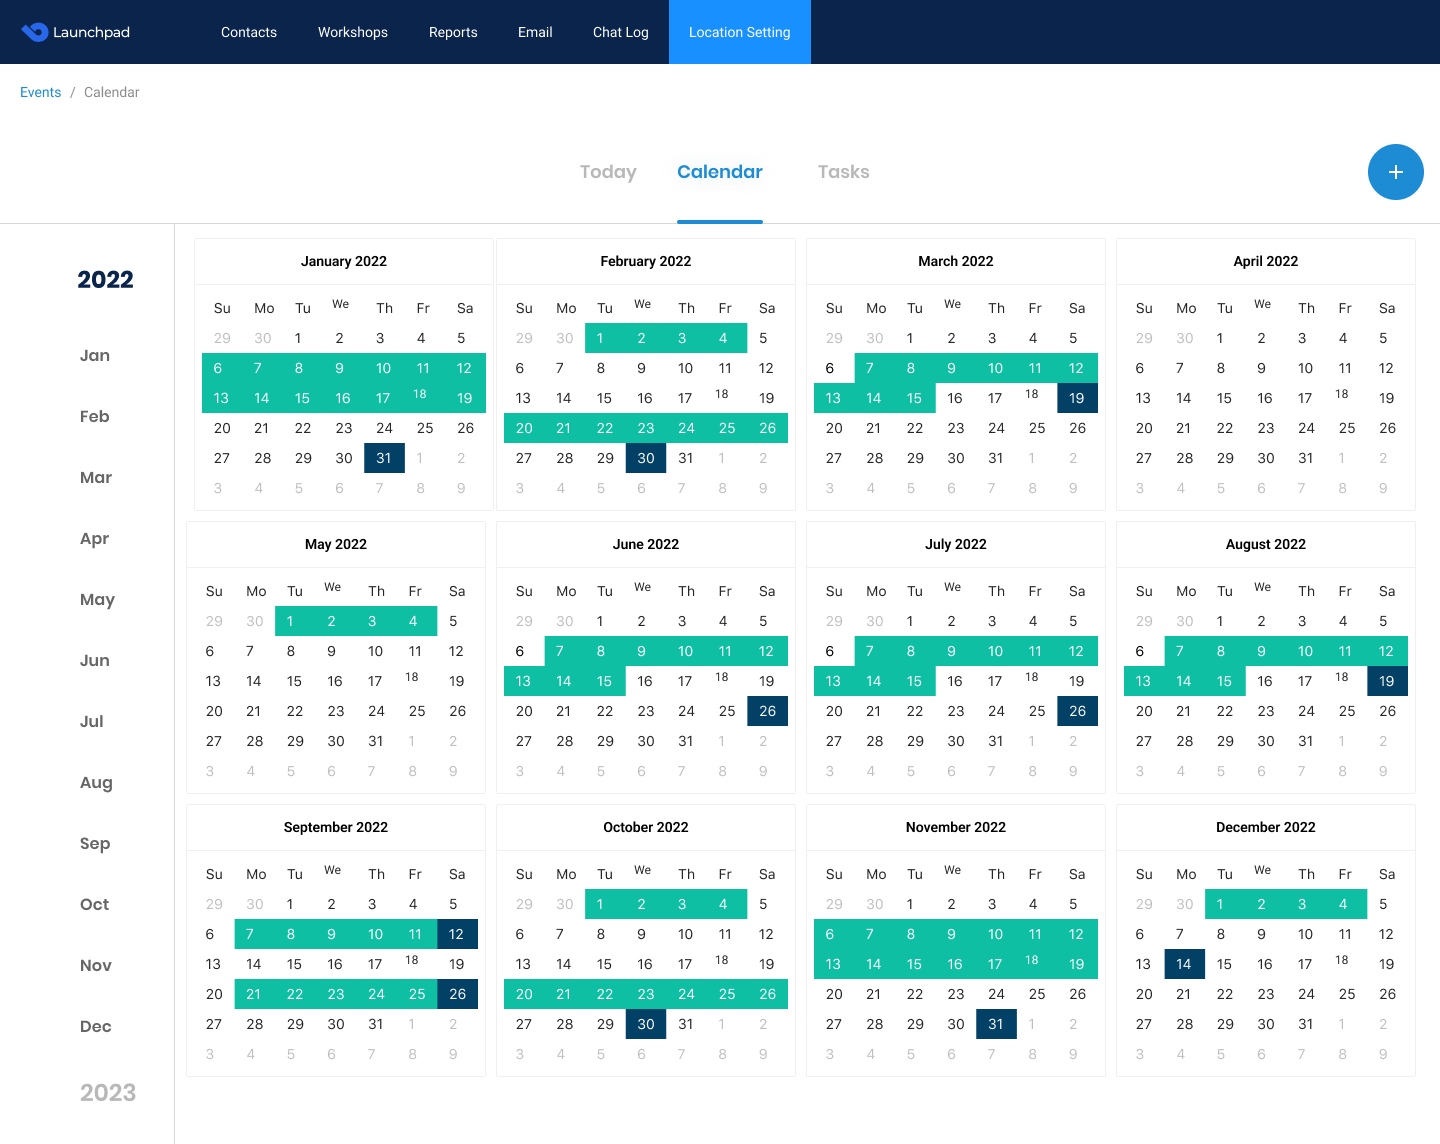 Marketing Calendar - Easily create and view your marketing calendar and activities.